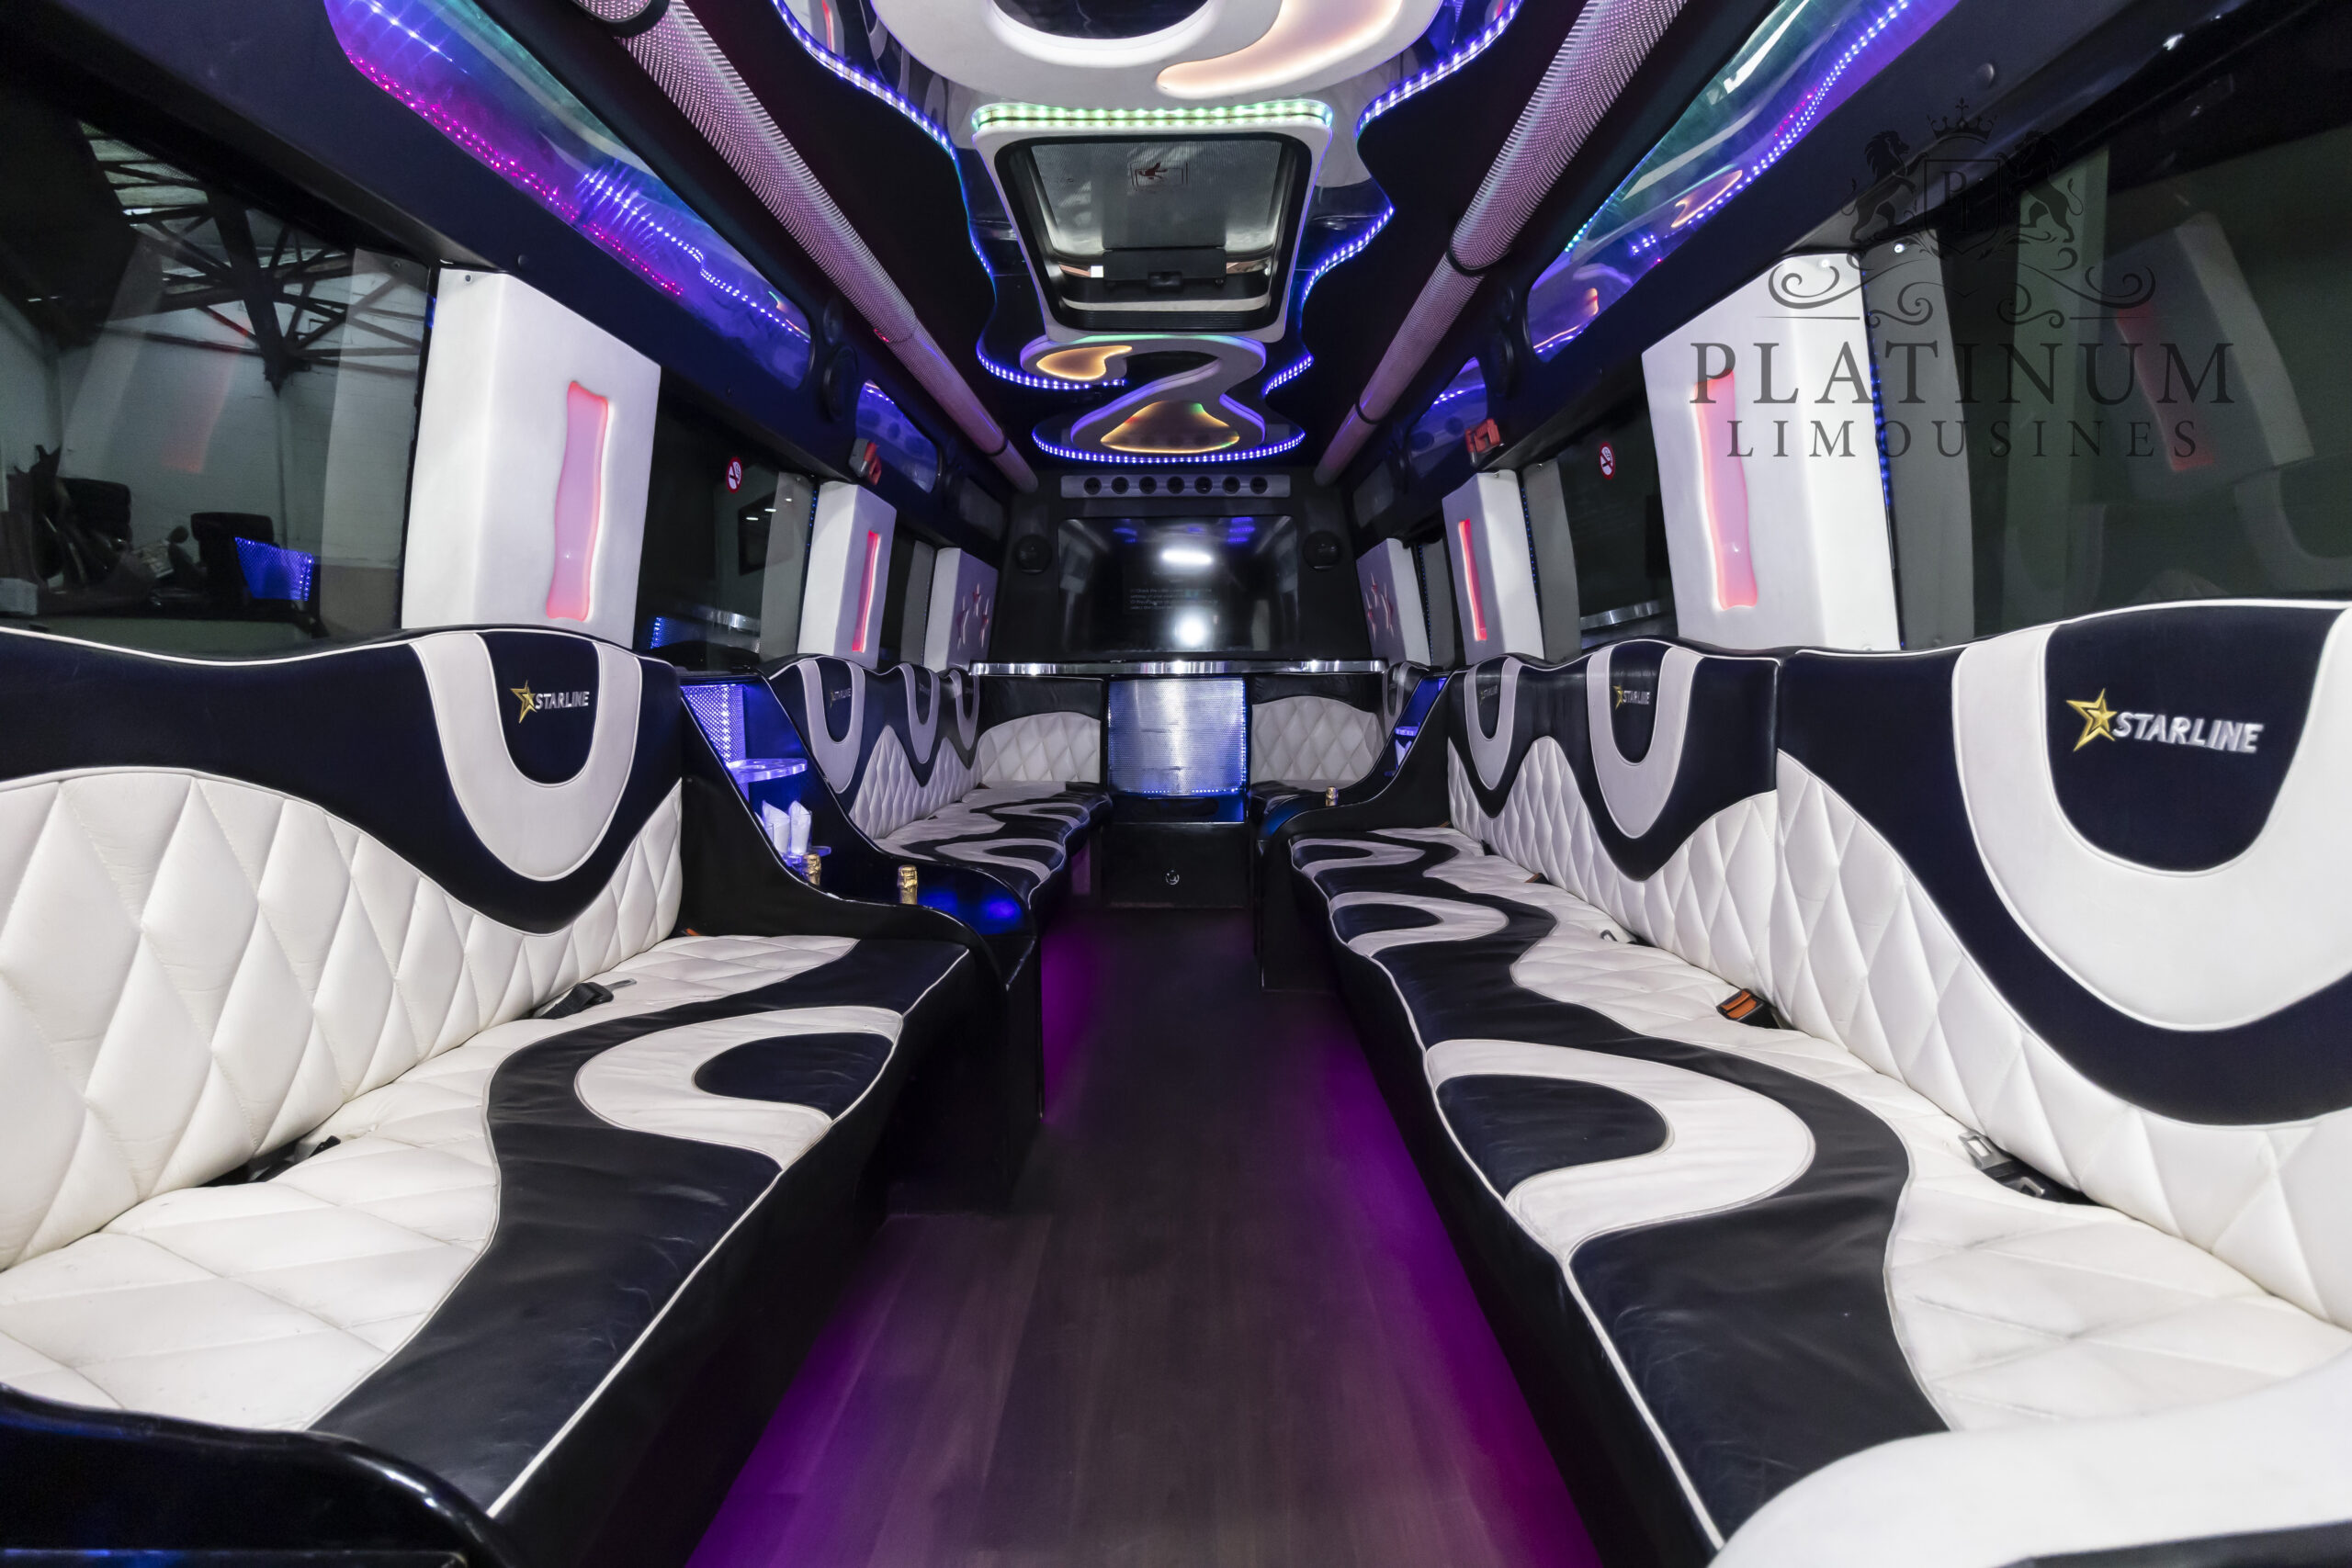 Shuttle Bus and Minibus Rental Escalade and Hummer Limo Philadelphia